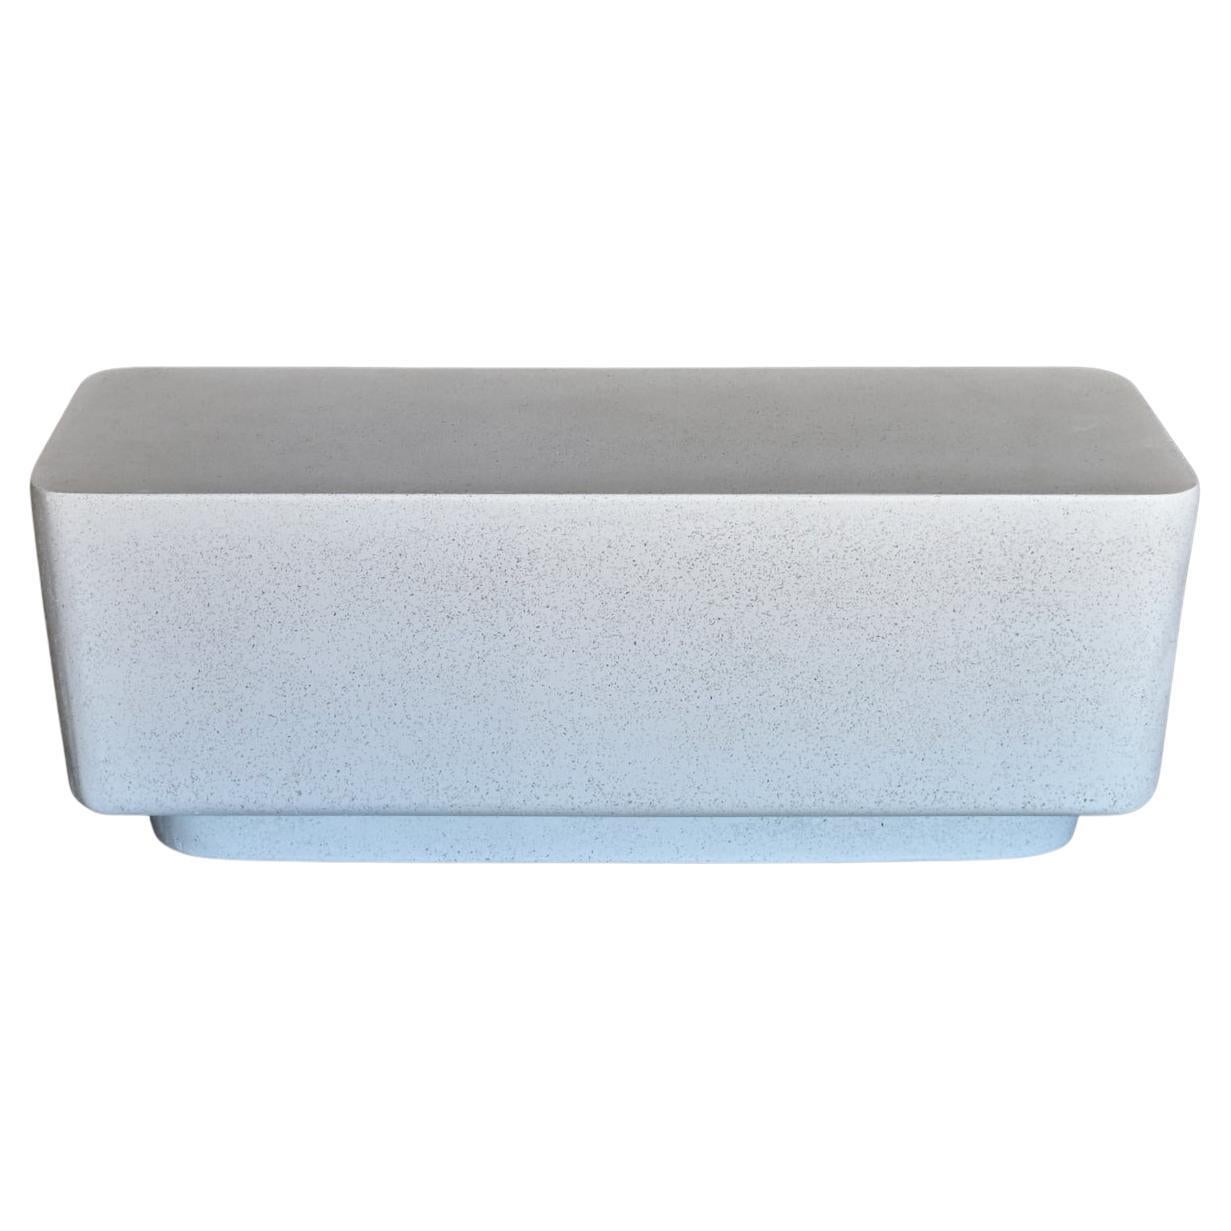 Cast Resin 'Block' Bench, White Stone Finish by Zachary A. Design